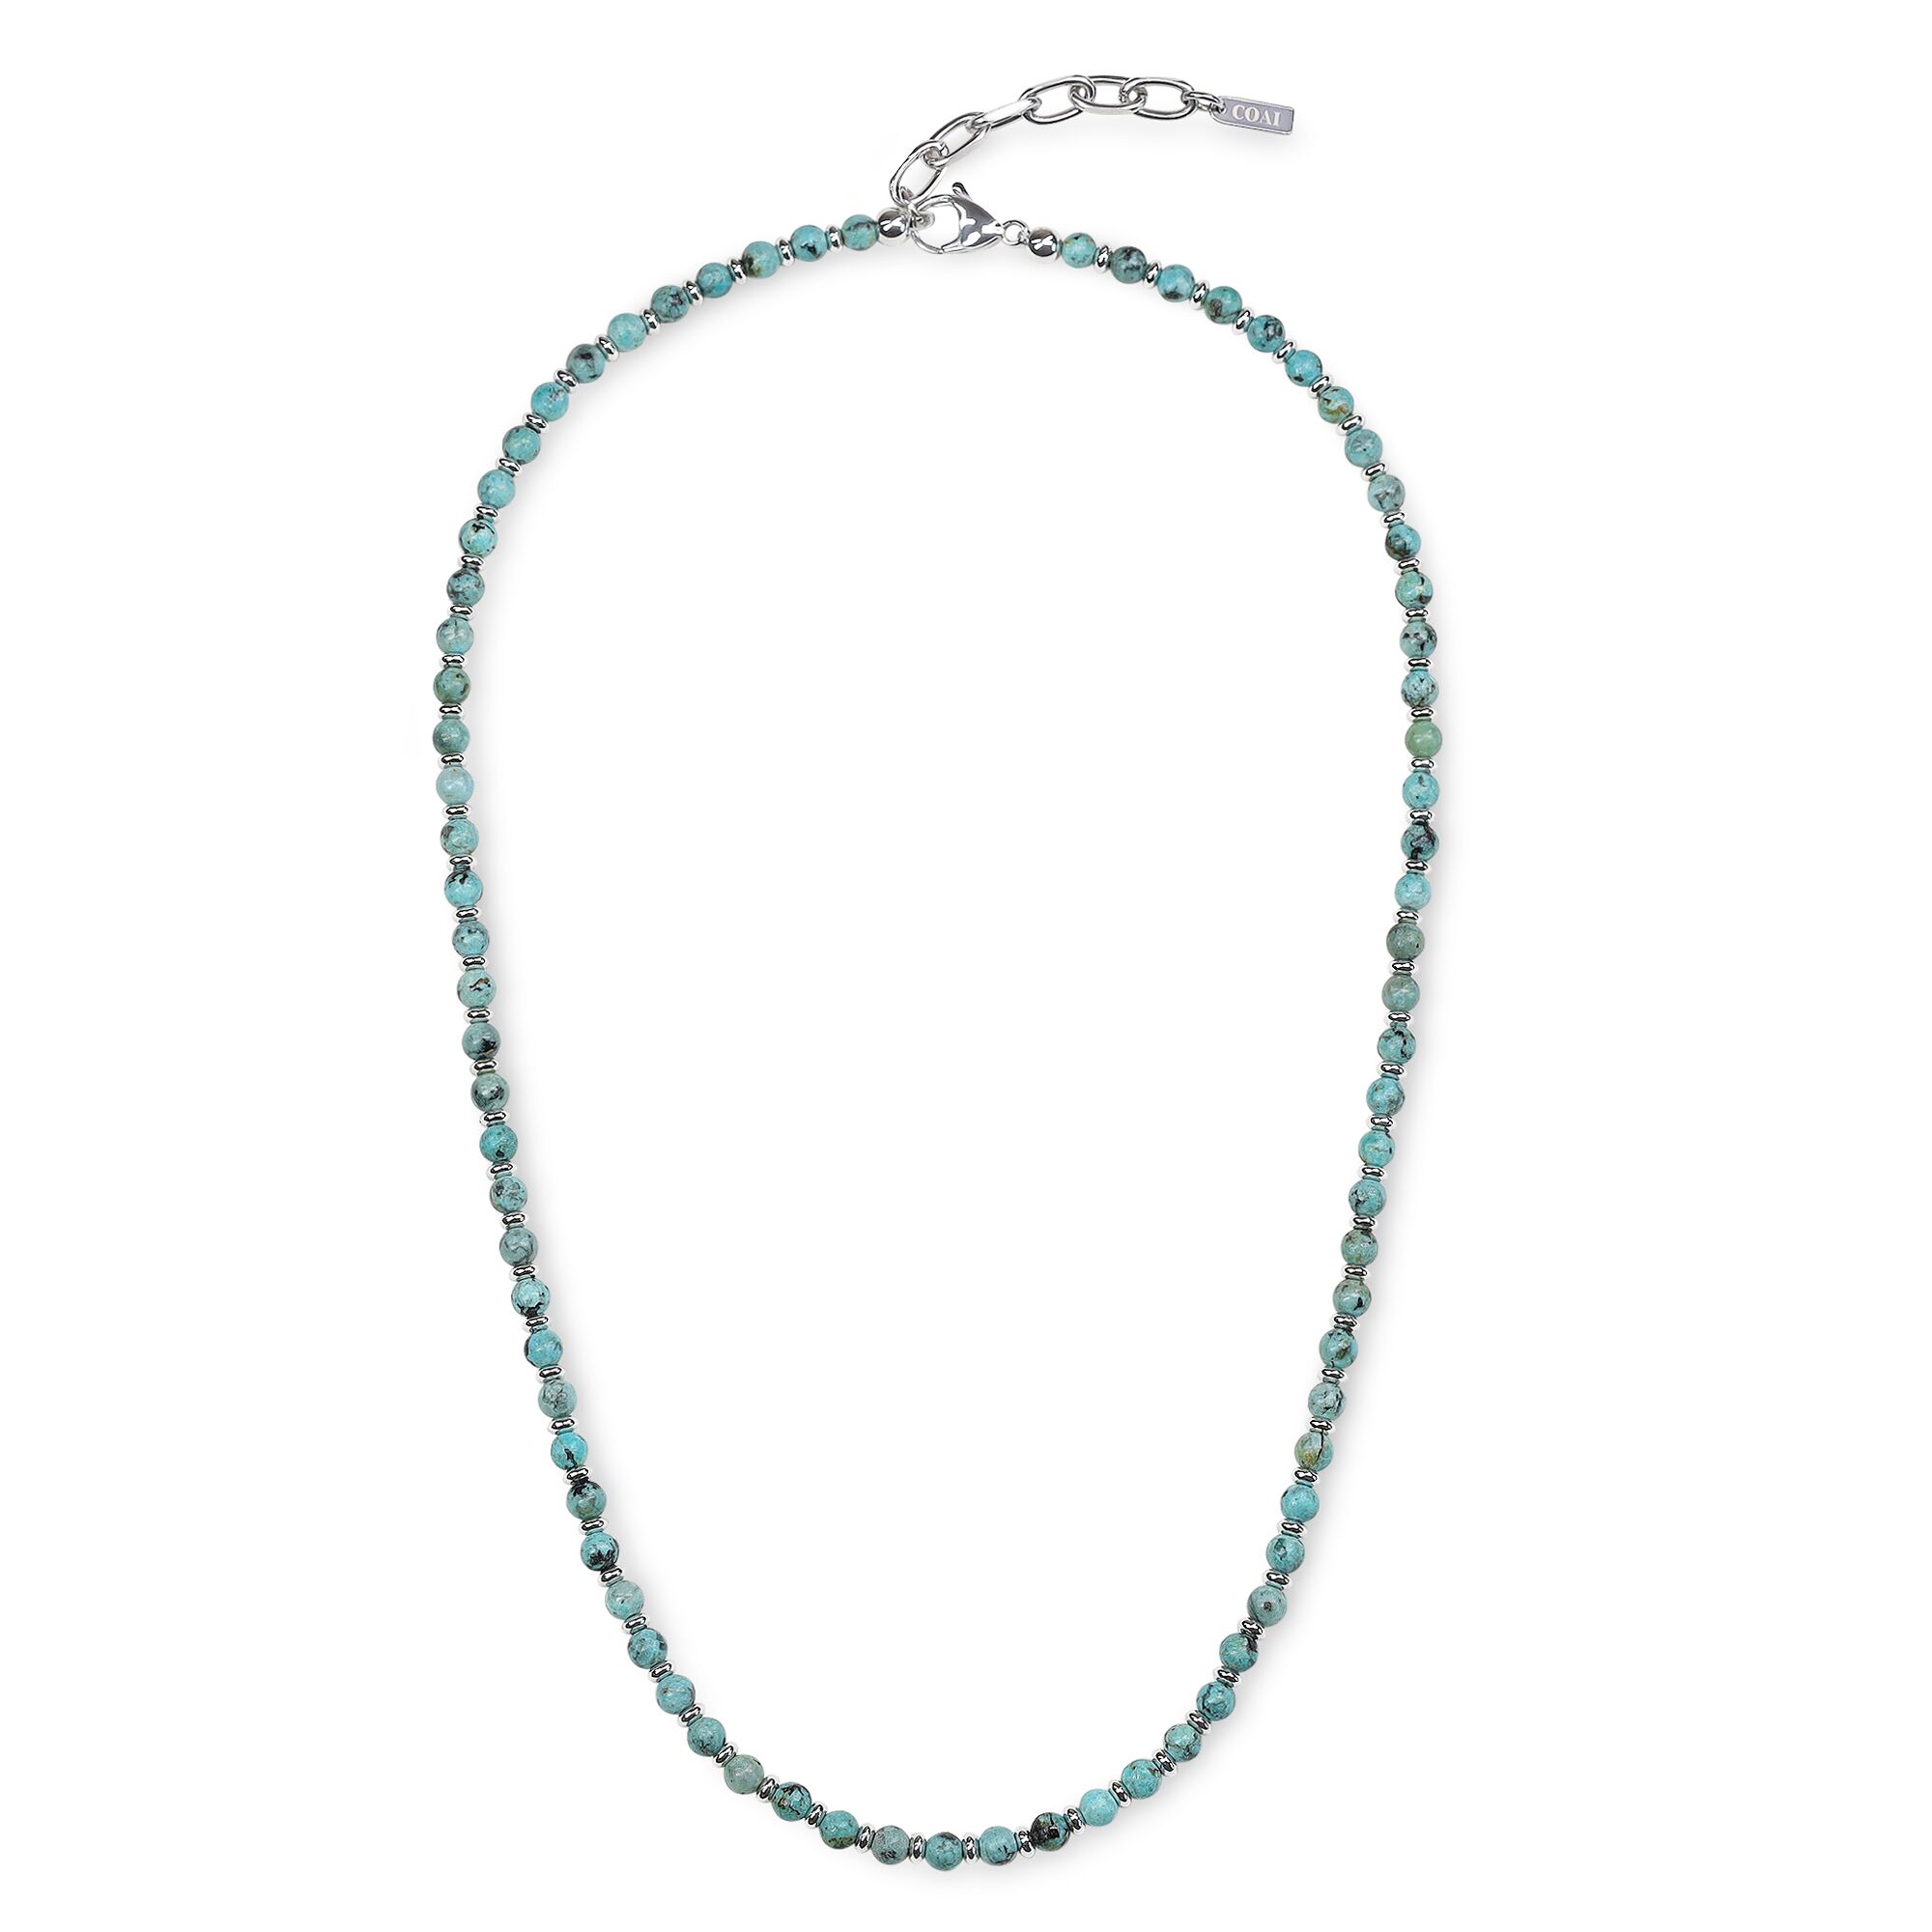 Claudia Agudelo EXEX Sterling Turquoise Necklace - Ruby Lane